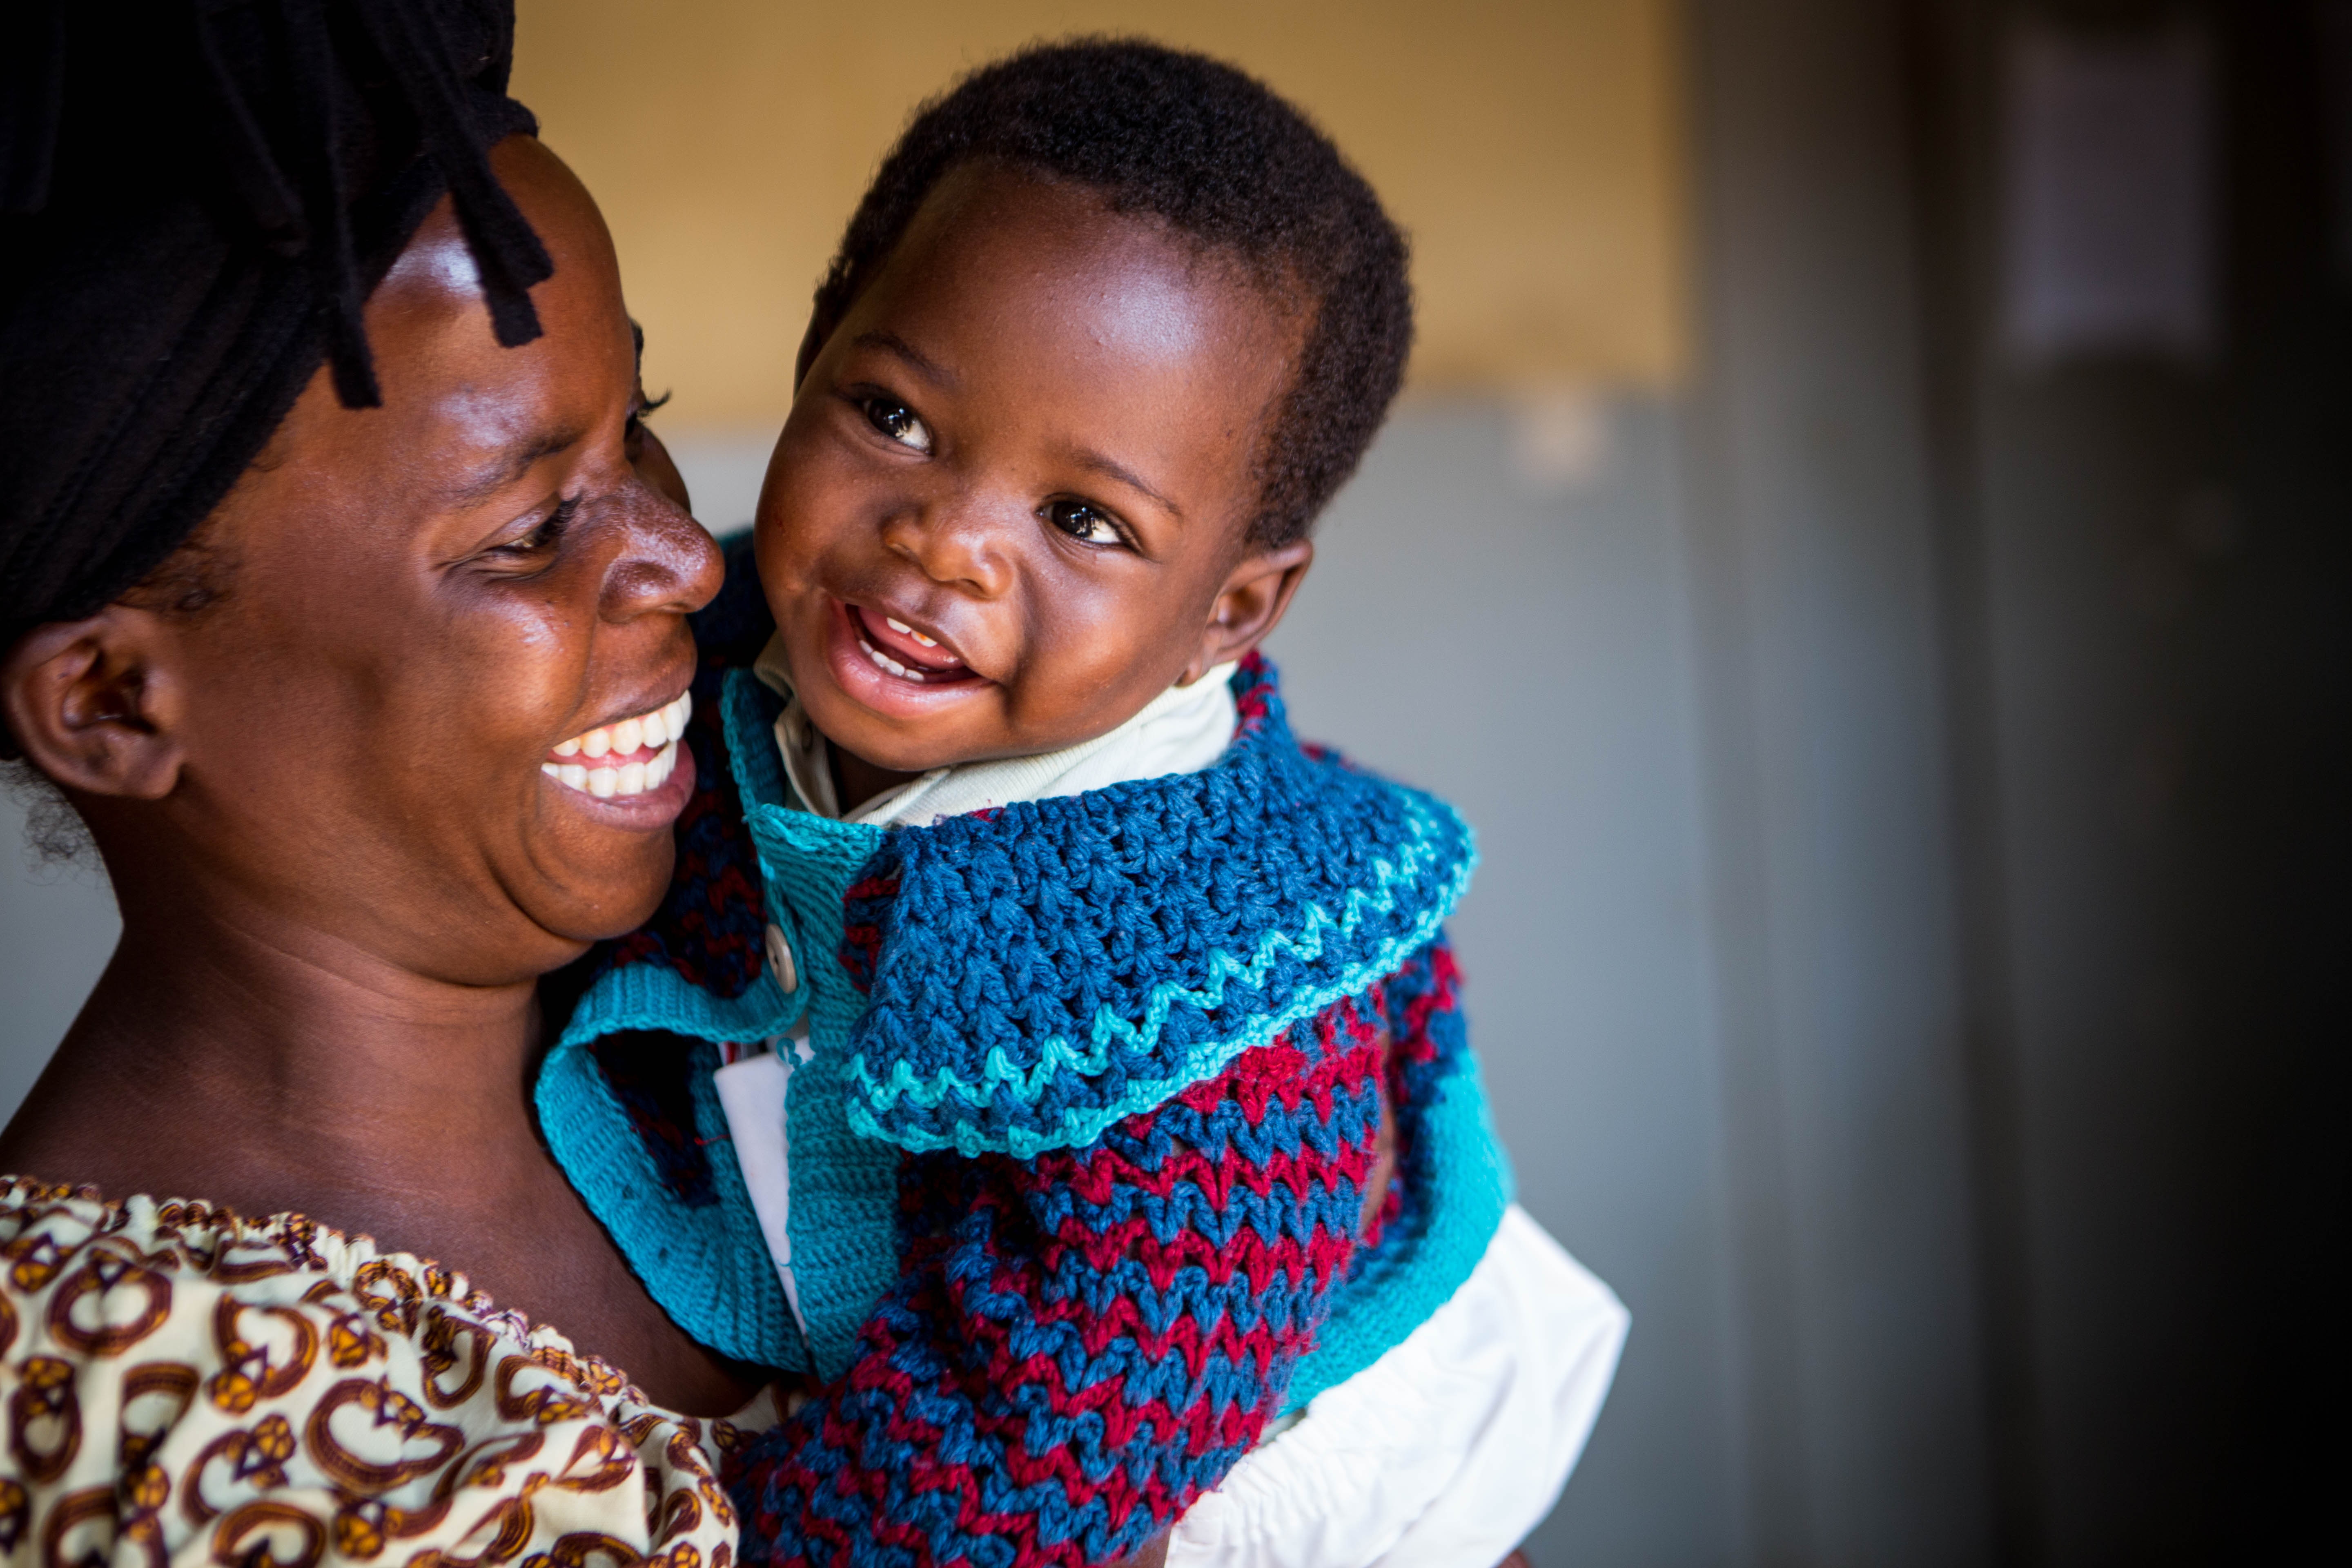 Mother and child in Blantyre, Malawi (©UNICEF/Schermbrucker/Malawi)